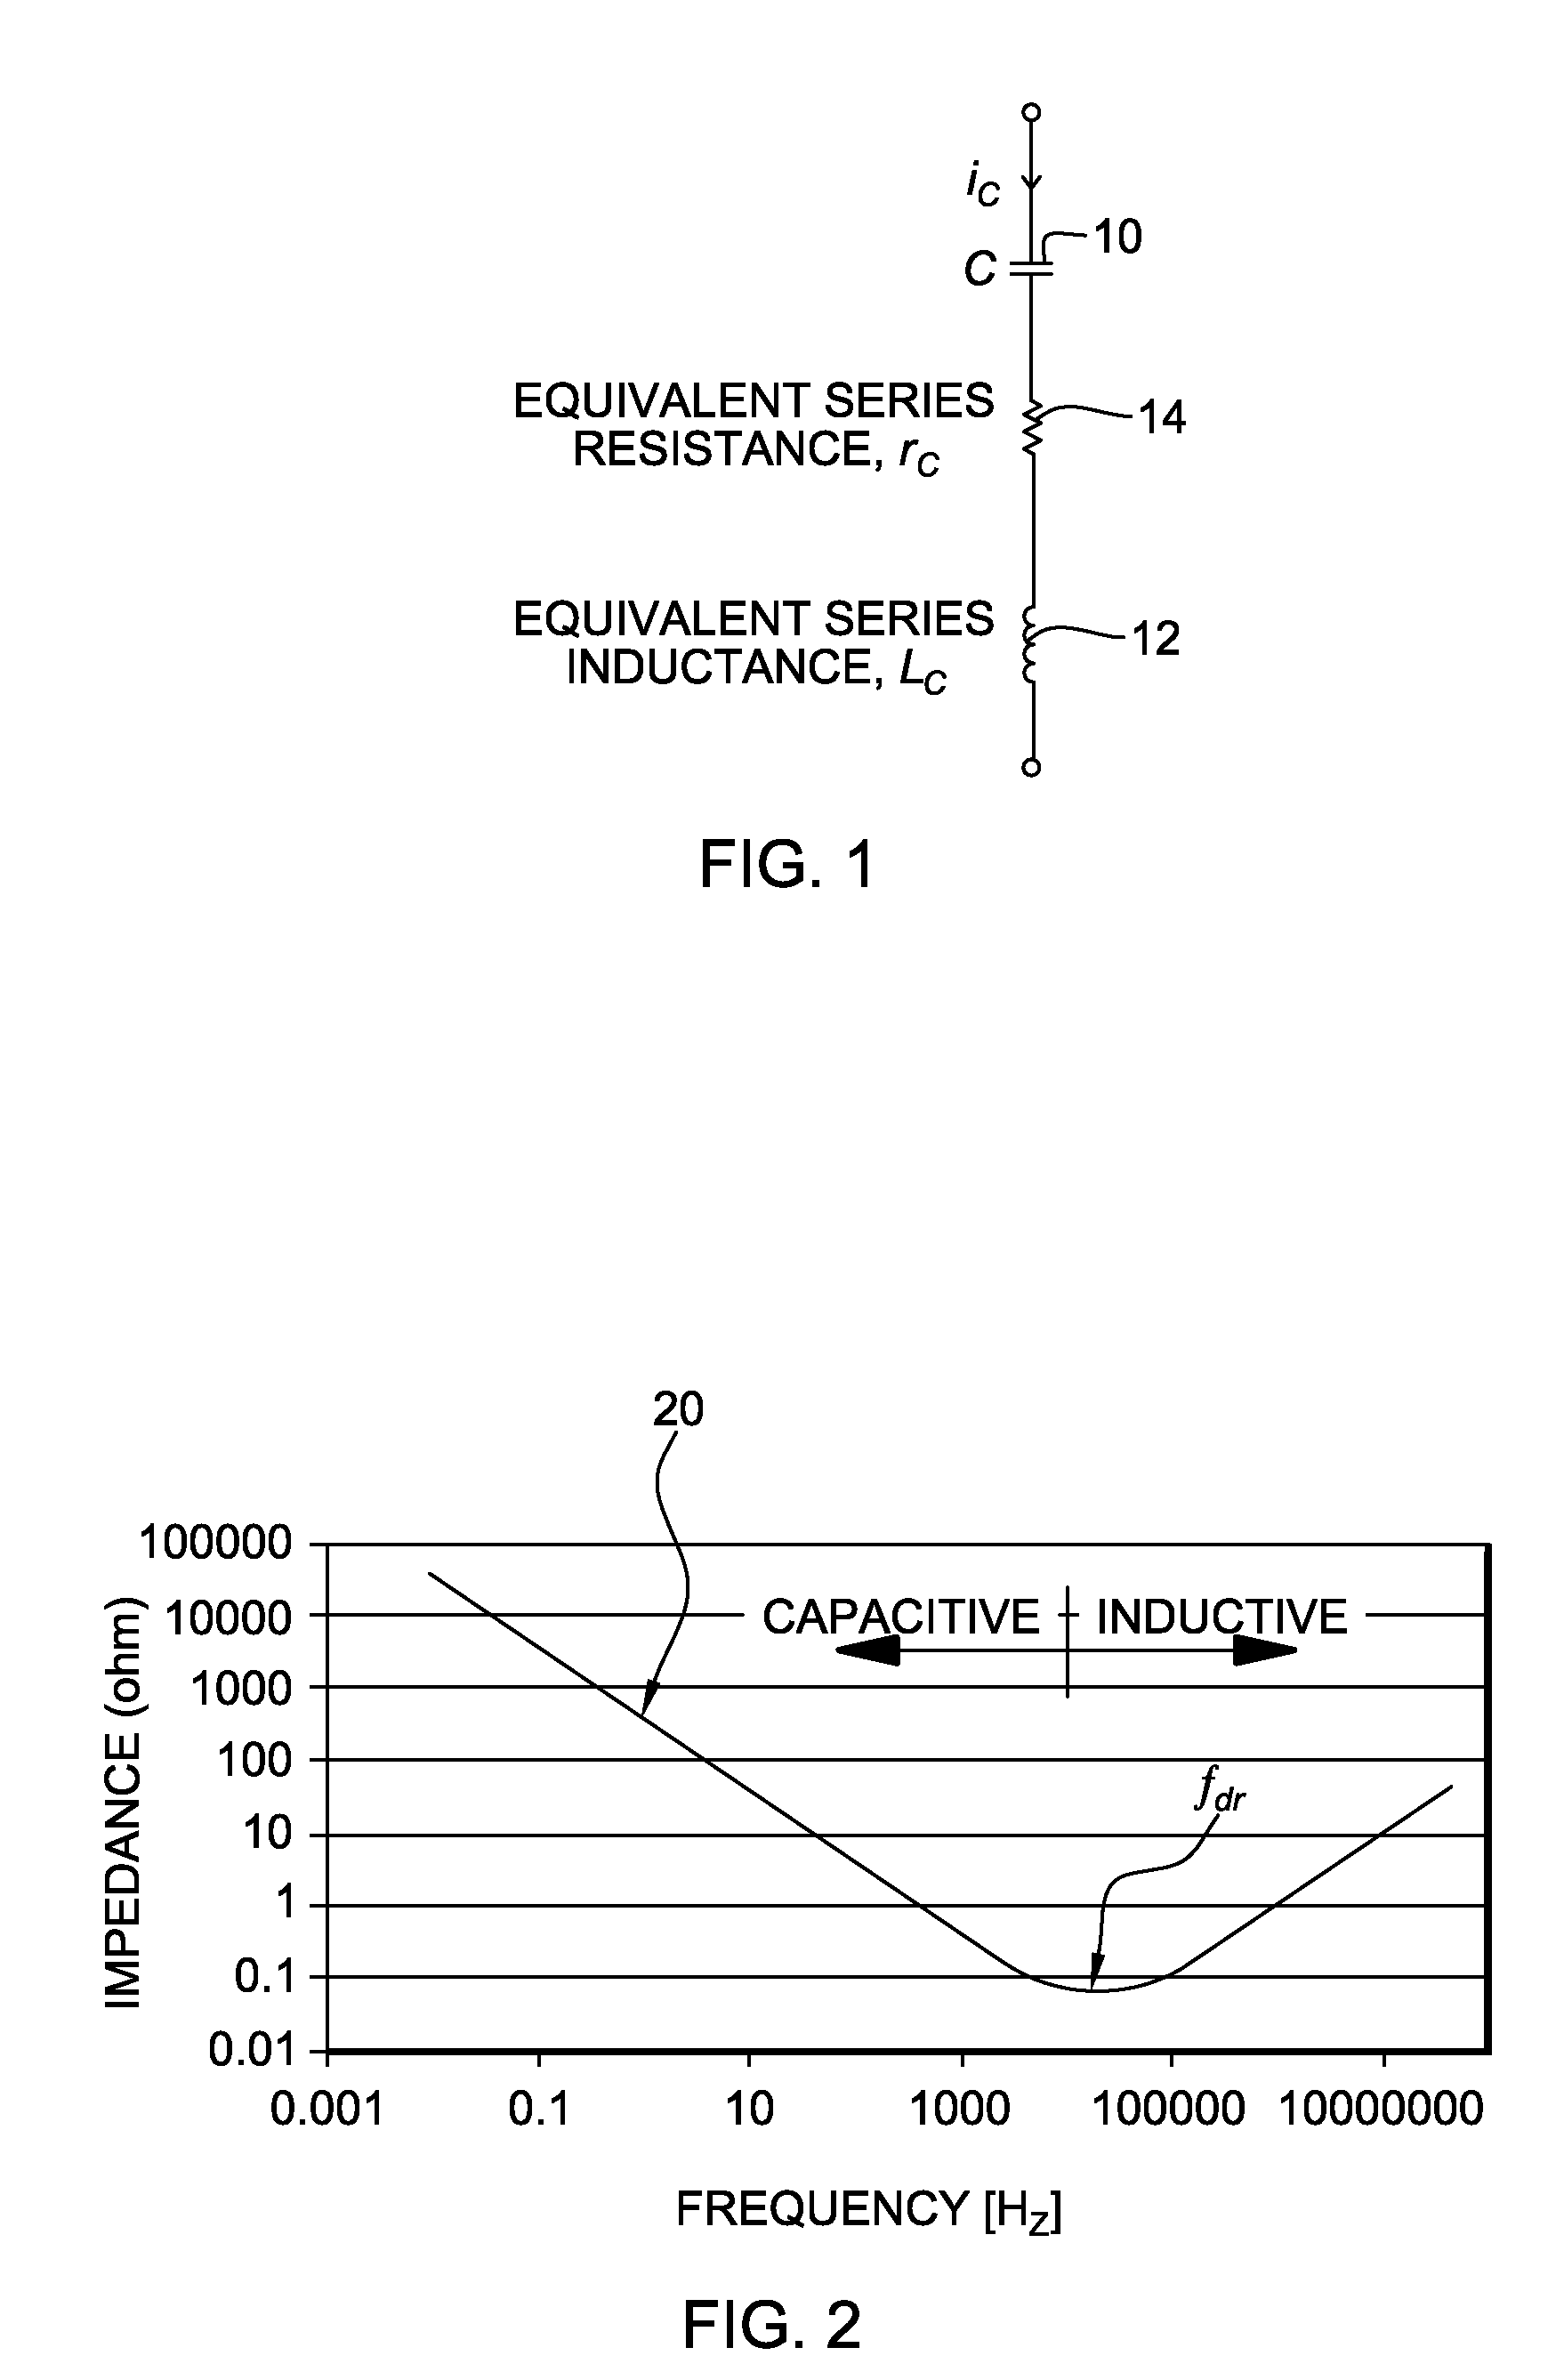 Method and apparatus to provide active cancellation of the effects of the parasitic elements in capacitors